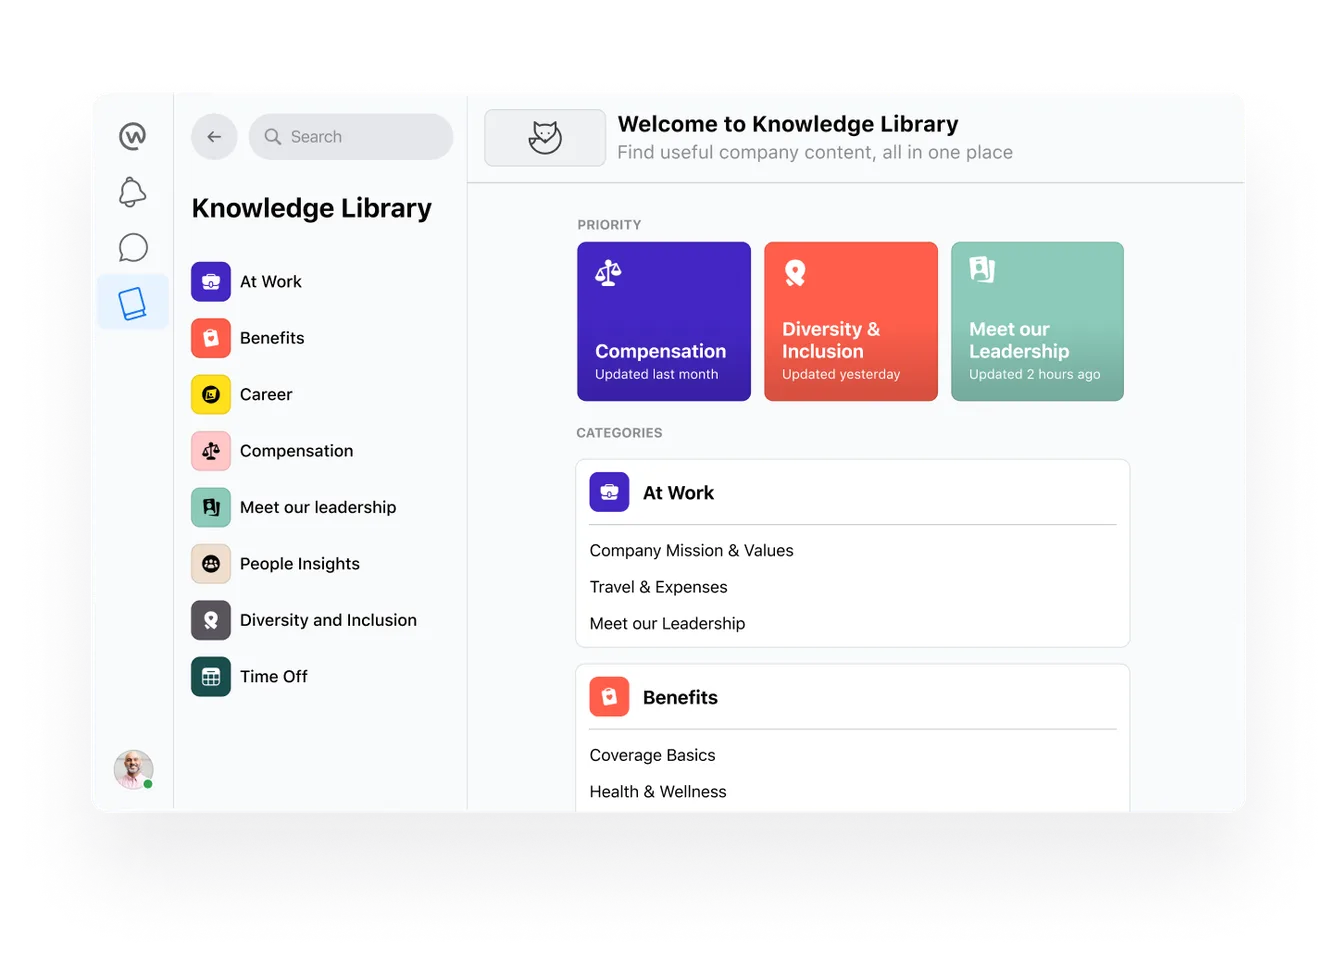 Knowledge Library